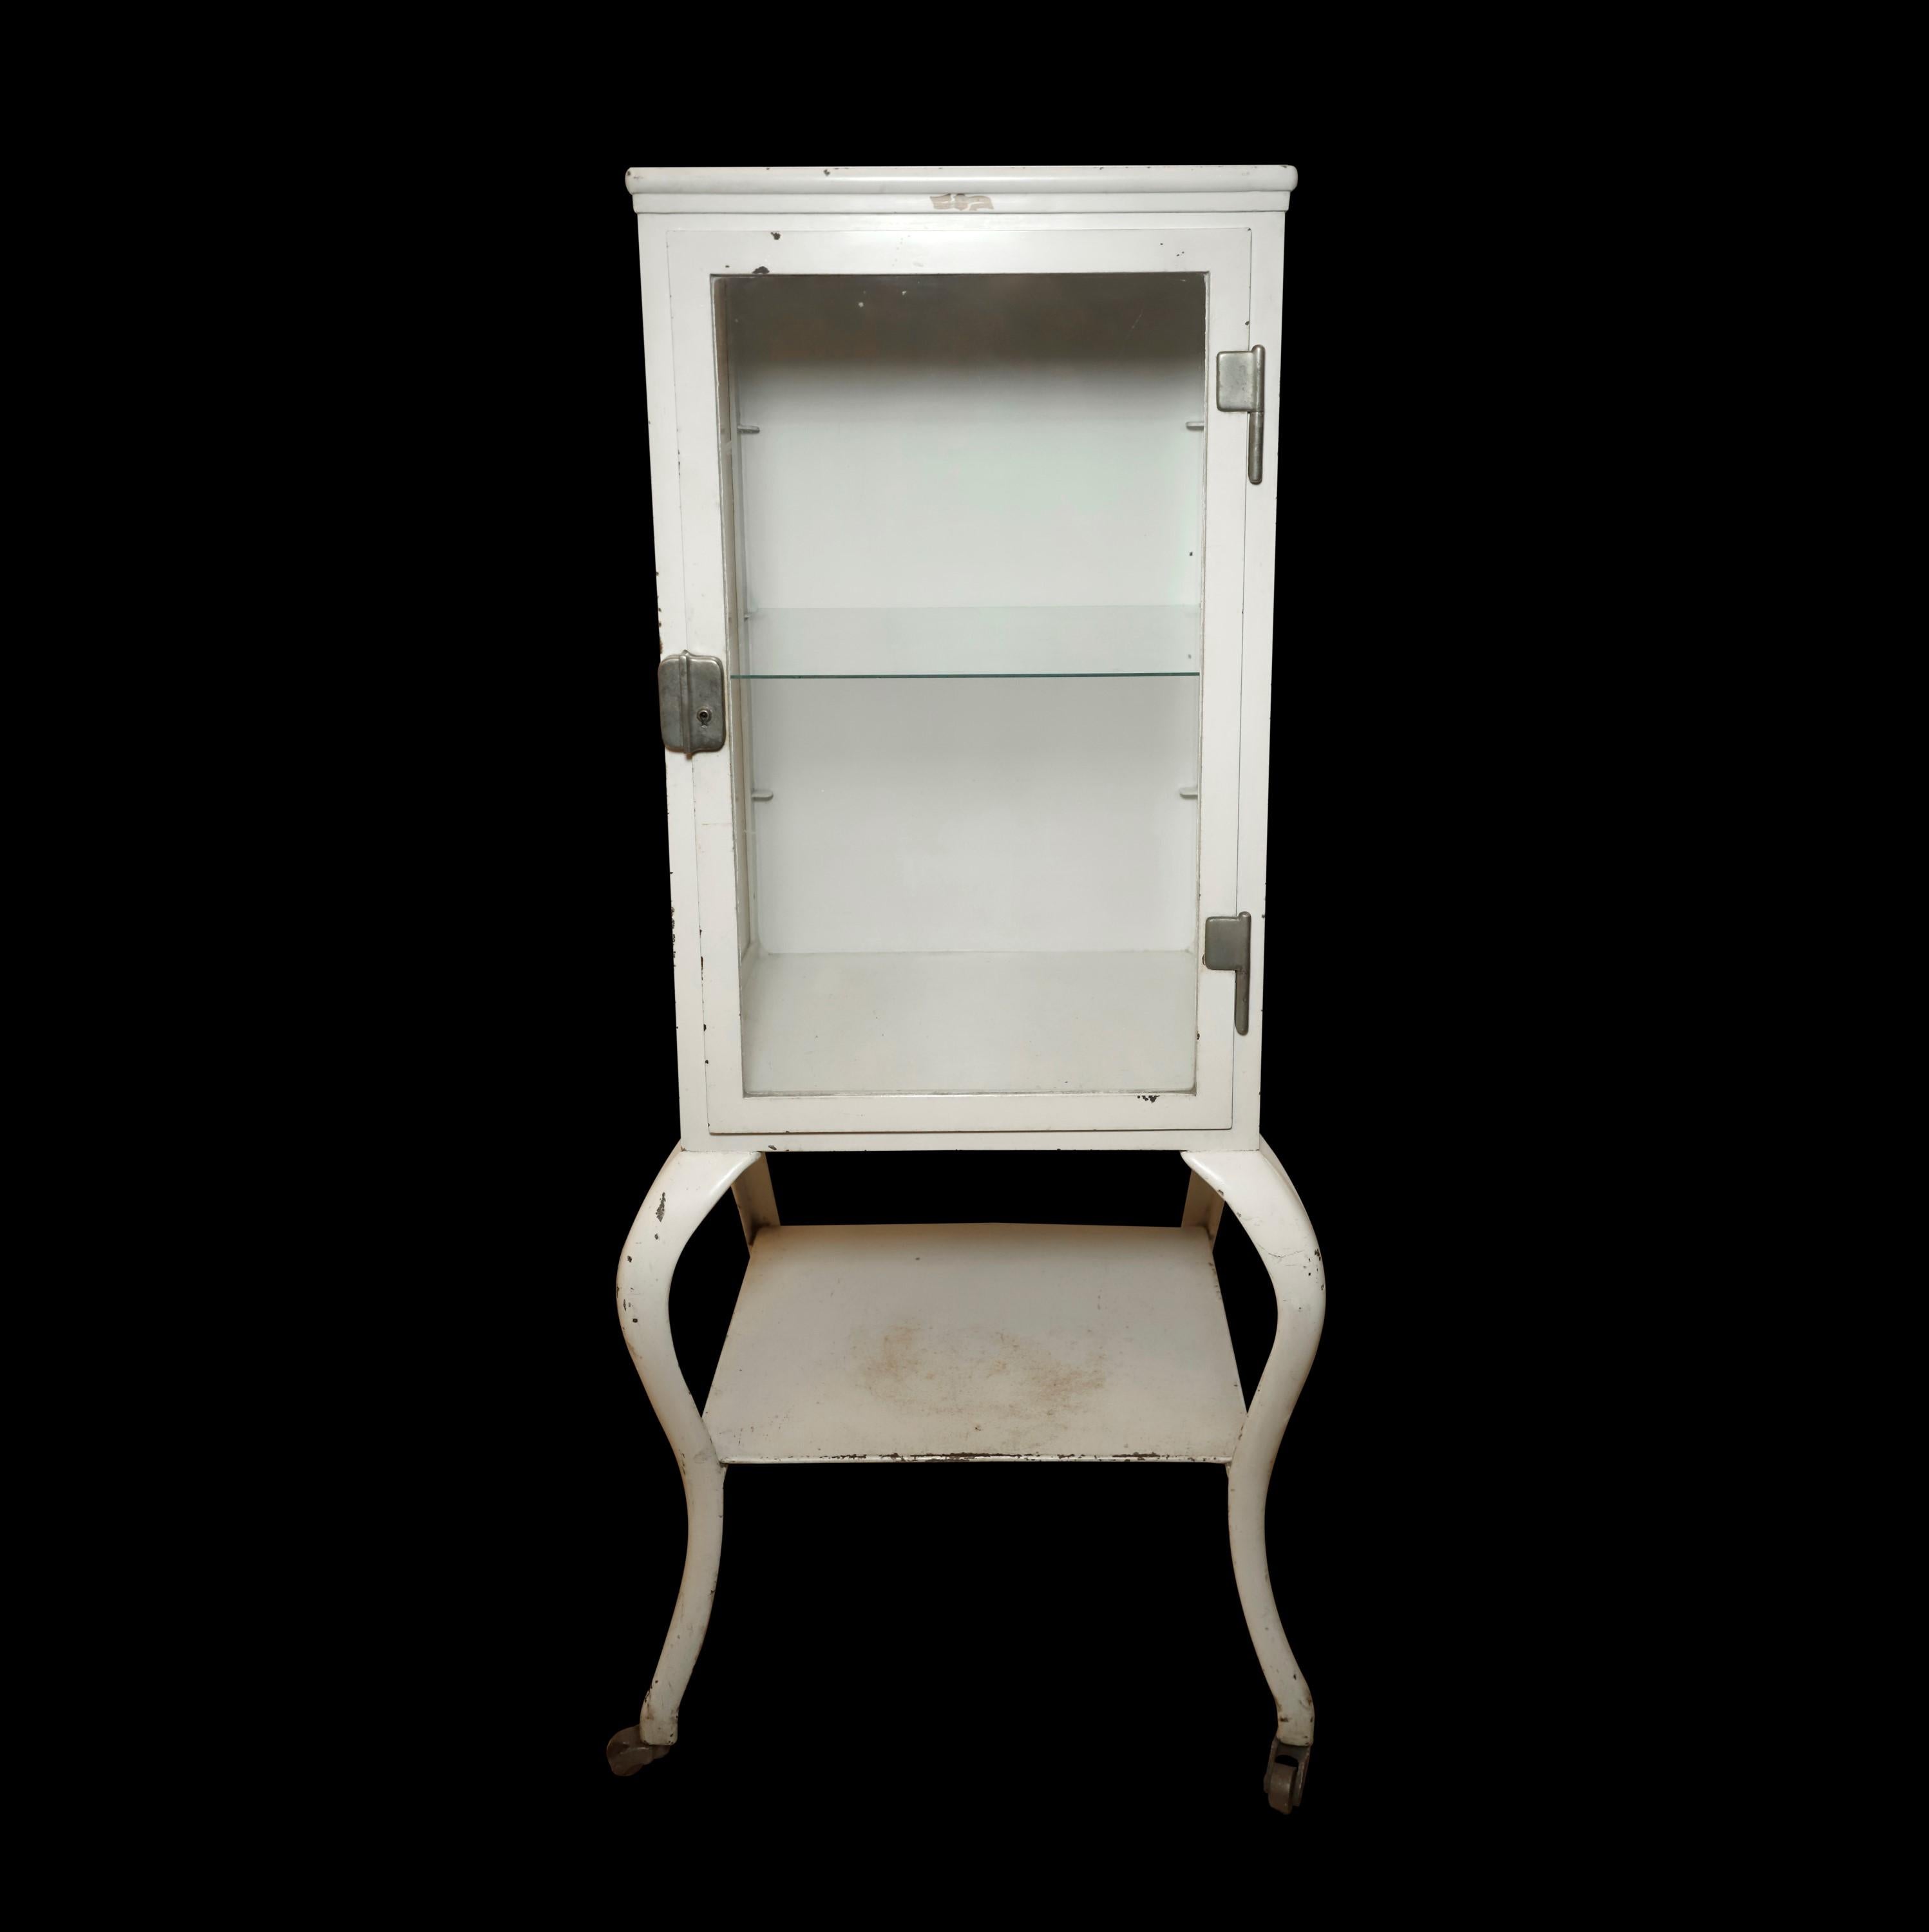 Early 20th century dental or medical cabinet. The cabinet itself is steel with glass sides, front door and one adjustable glass shelf. The cabriole legs are cast iron. Bottom shelf is sheet steel. Still with original white finish and original